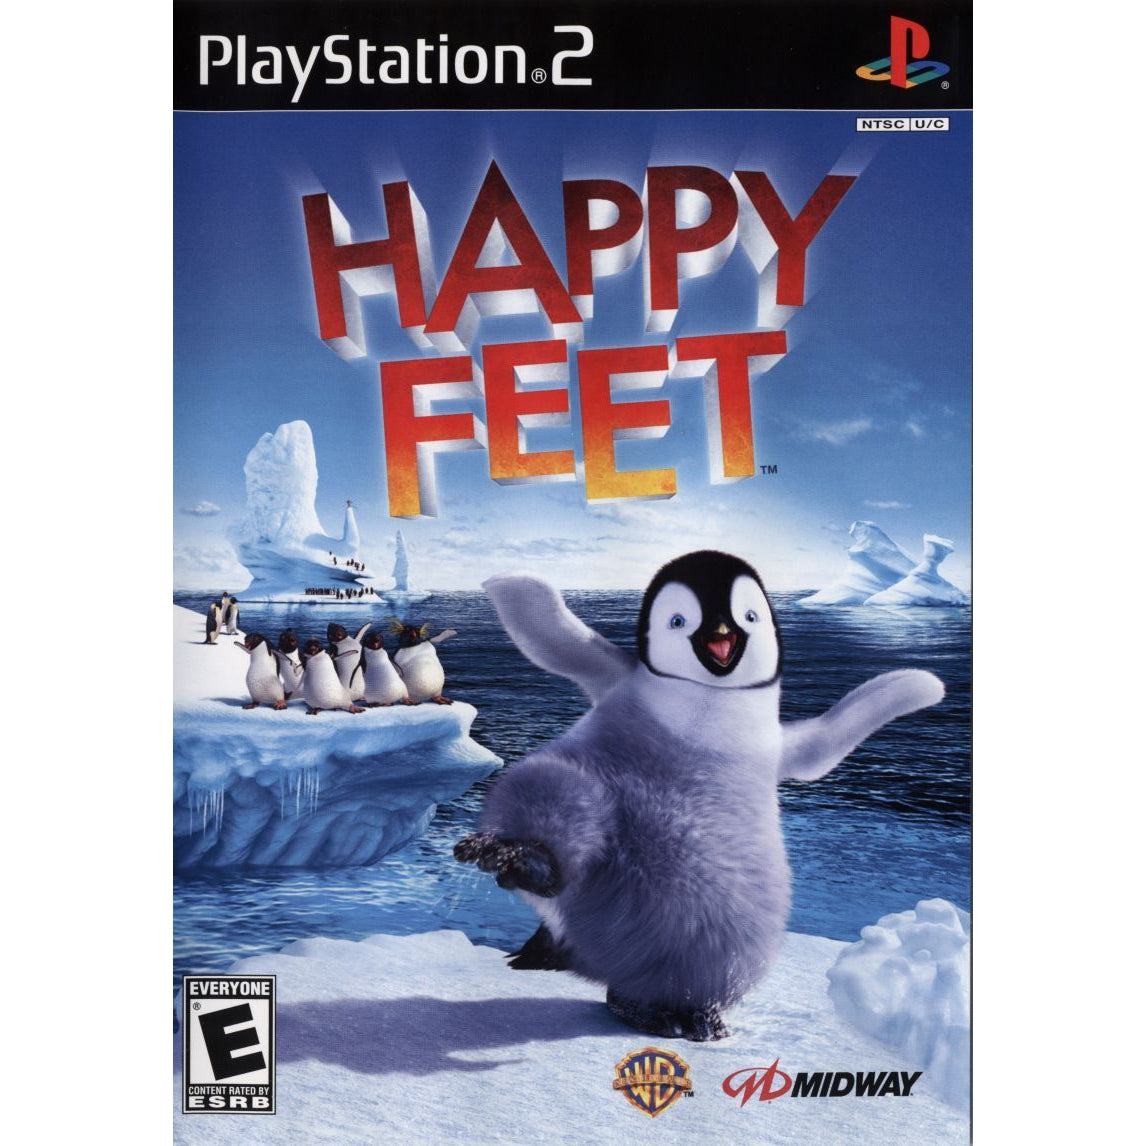 Happy Feet - PlayStation 2 (PS2) Game Complete - YourGamingShop.com - Buy, Sell, Trade Video Games Online. 120 Day Warranty. Satisfaction Guaranteed.